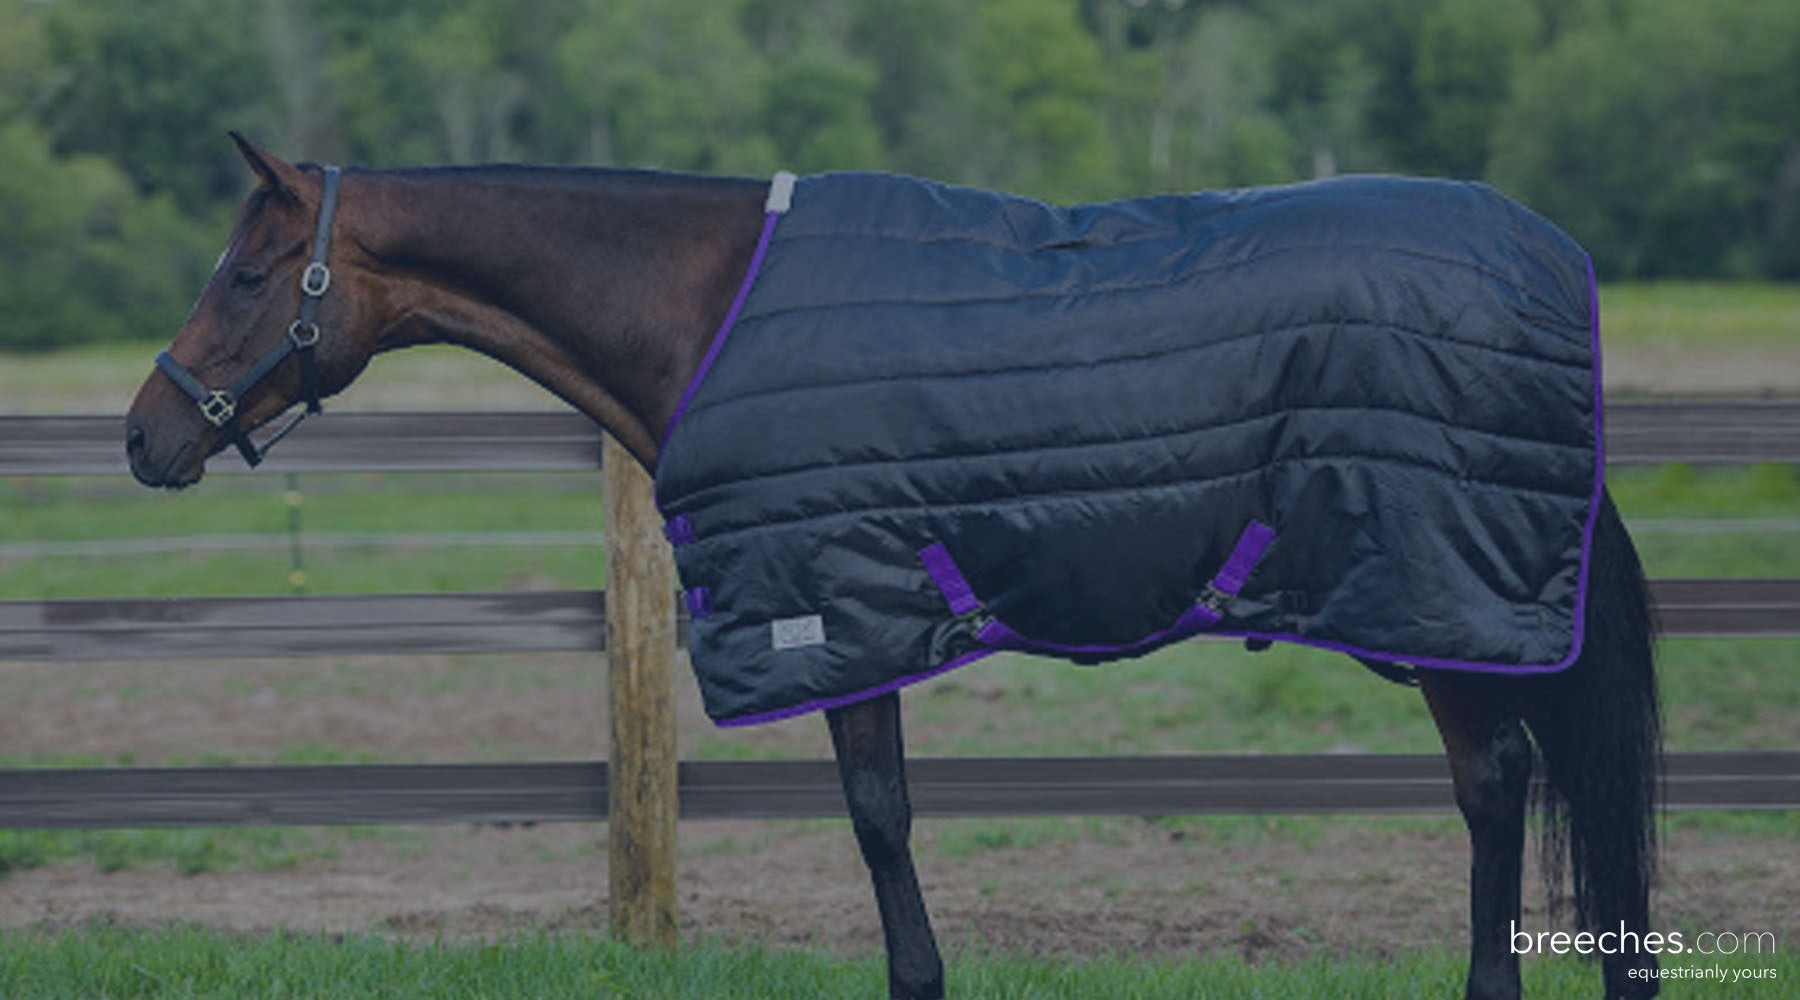 How To Measure Your Horse For A Blanket Plus a few tips to make sure it DOES fit!